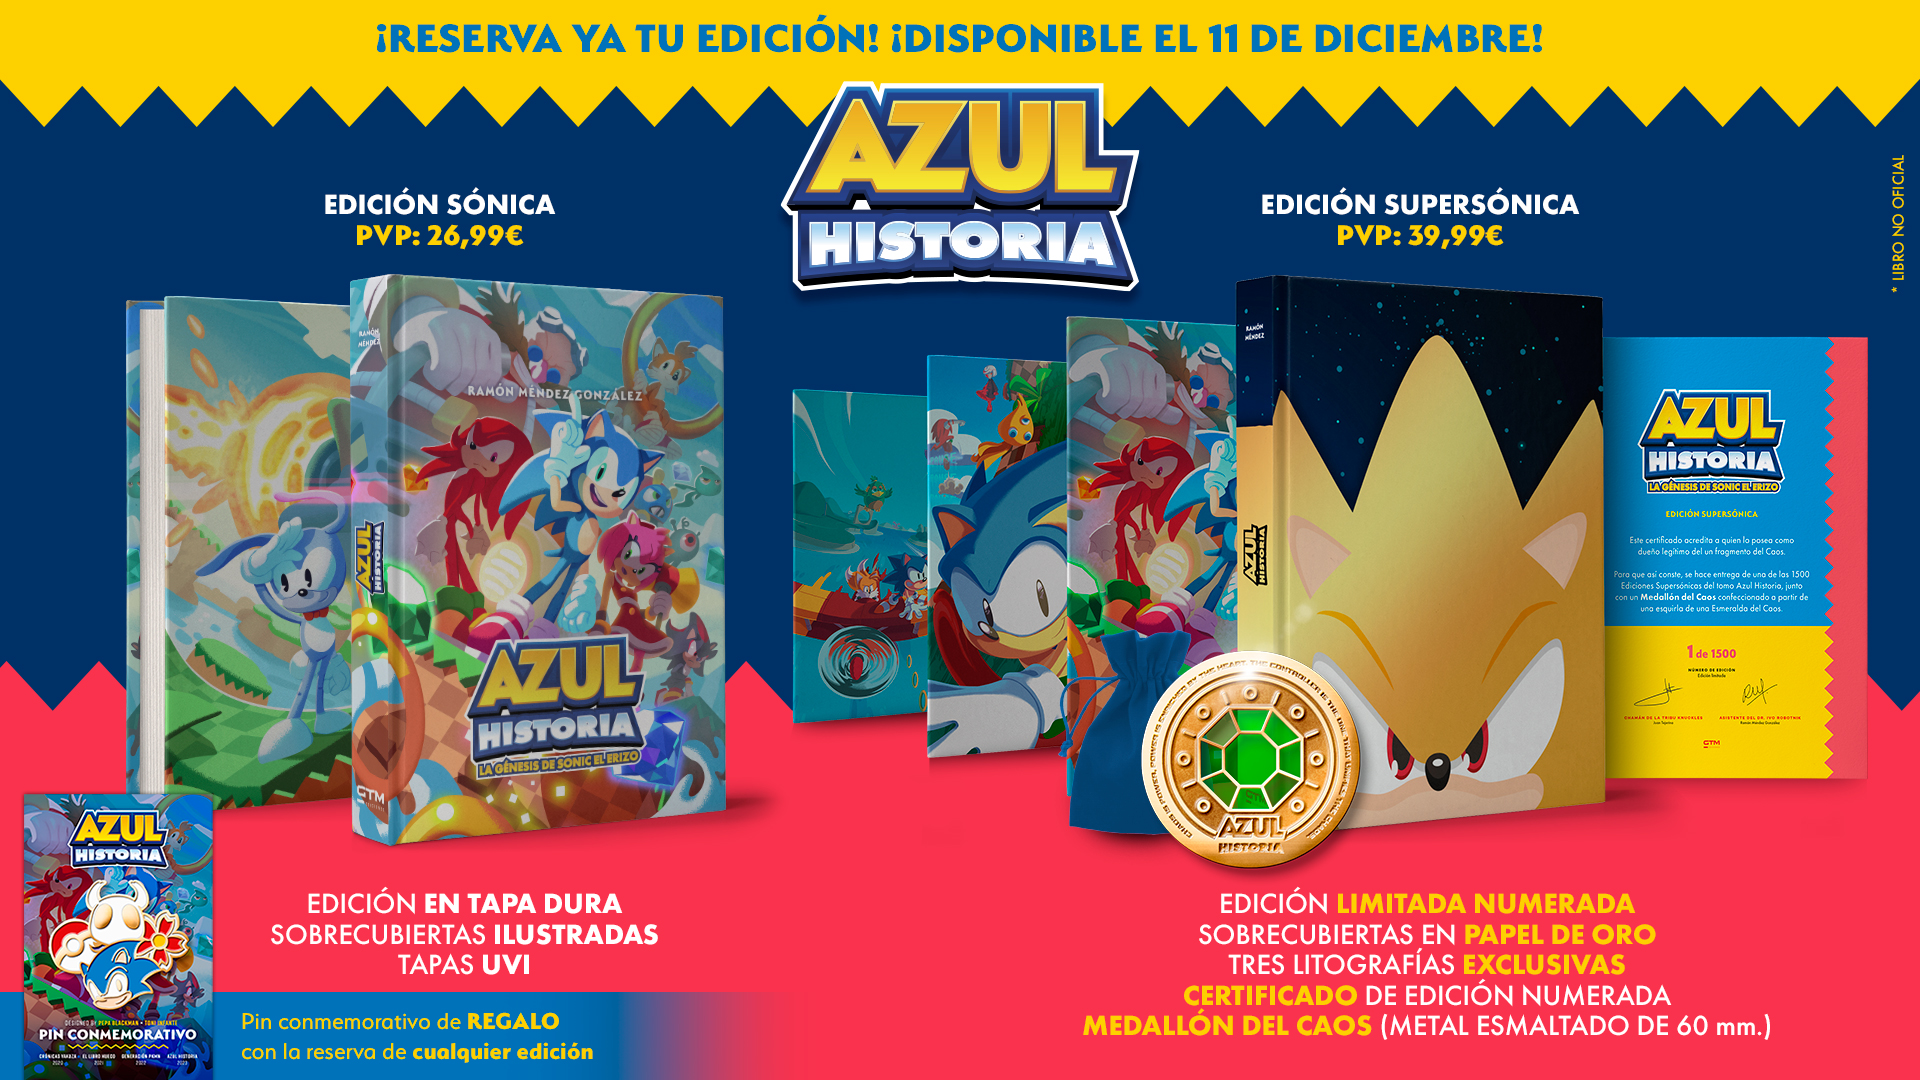 Games Tribune Magazine Announces AZUL HISTORIA - a Special 280-Page Book About the History of Sonic the Hedgehog